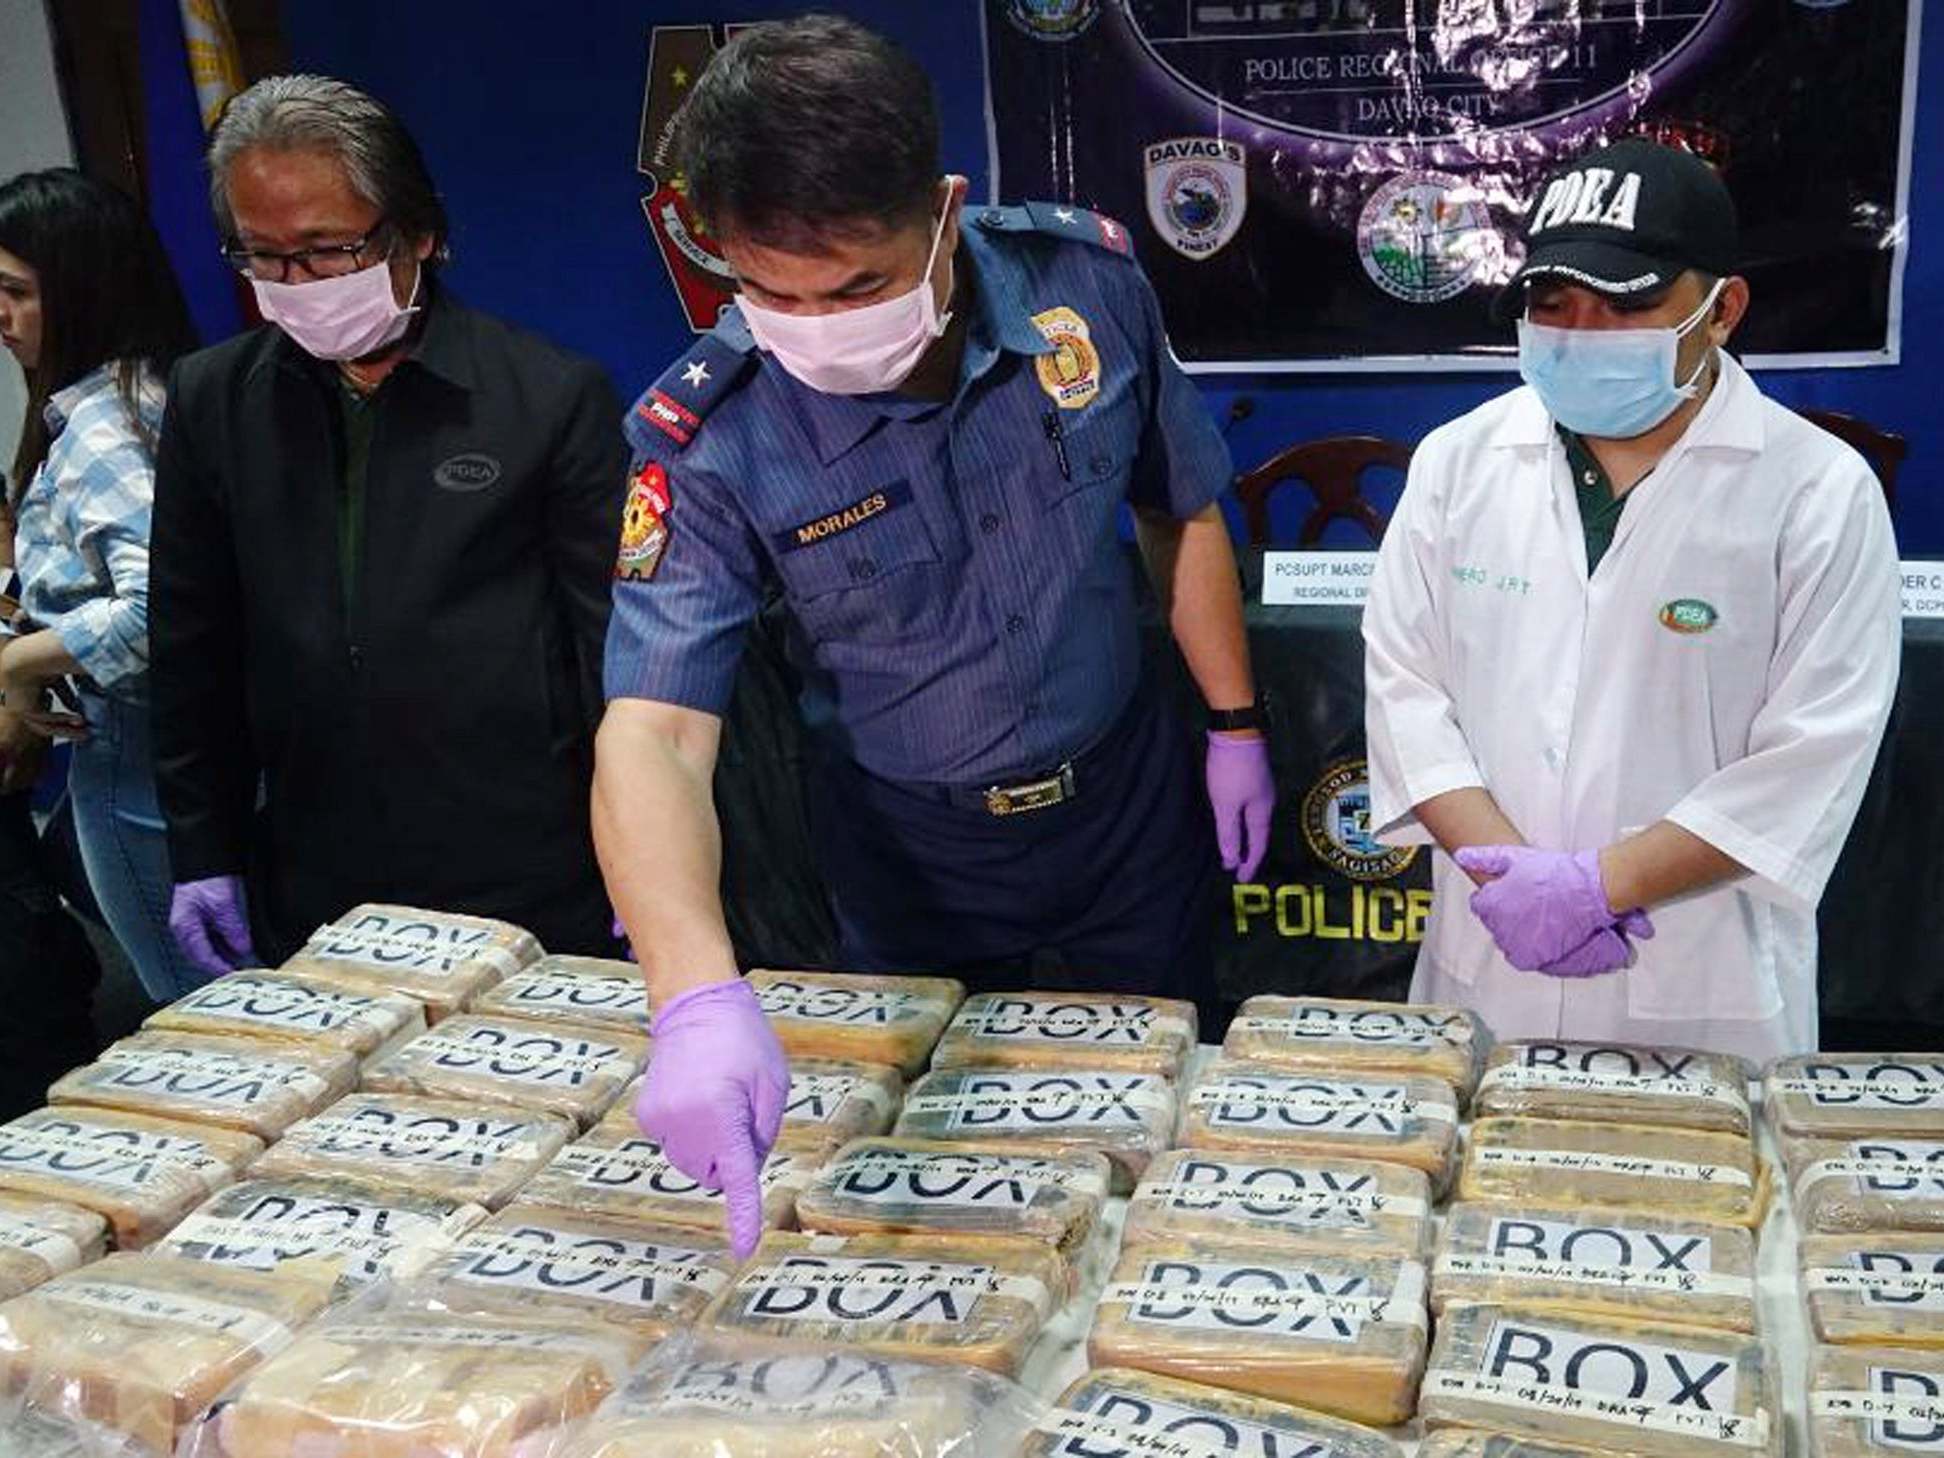 The Philippines has an extremely harsh stance on drugs